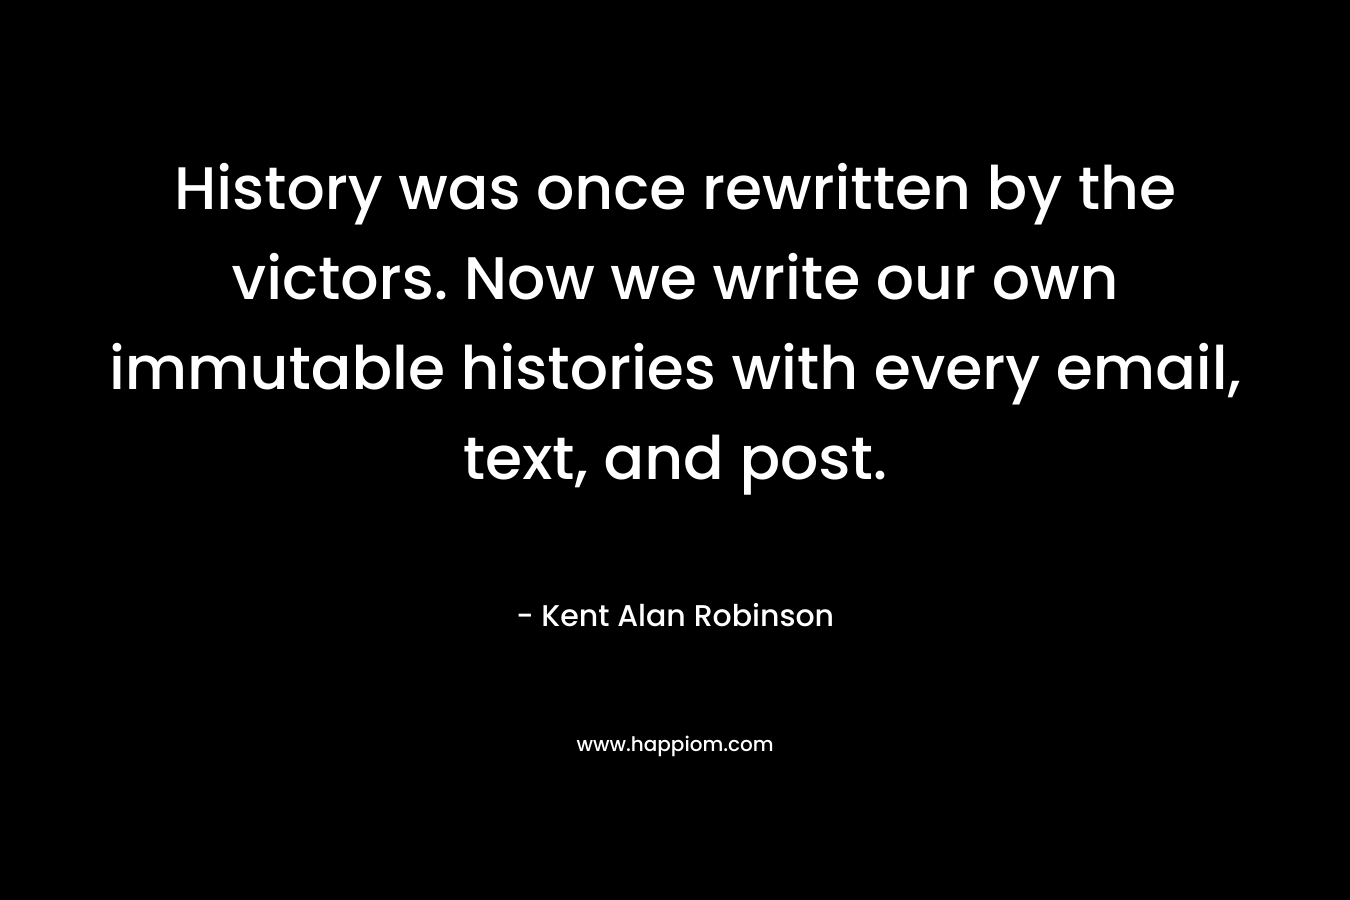 History was once rewritten by the victors. Now we write our own immutable histories with every email, text, and post.